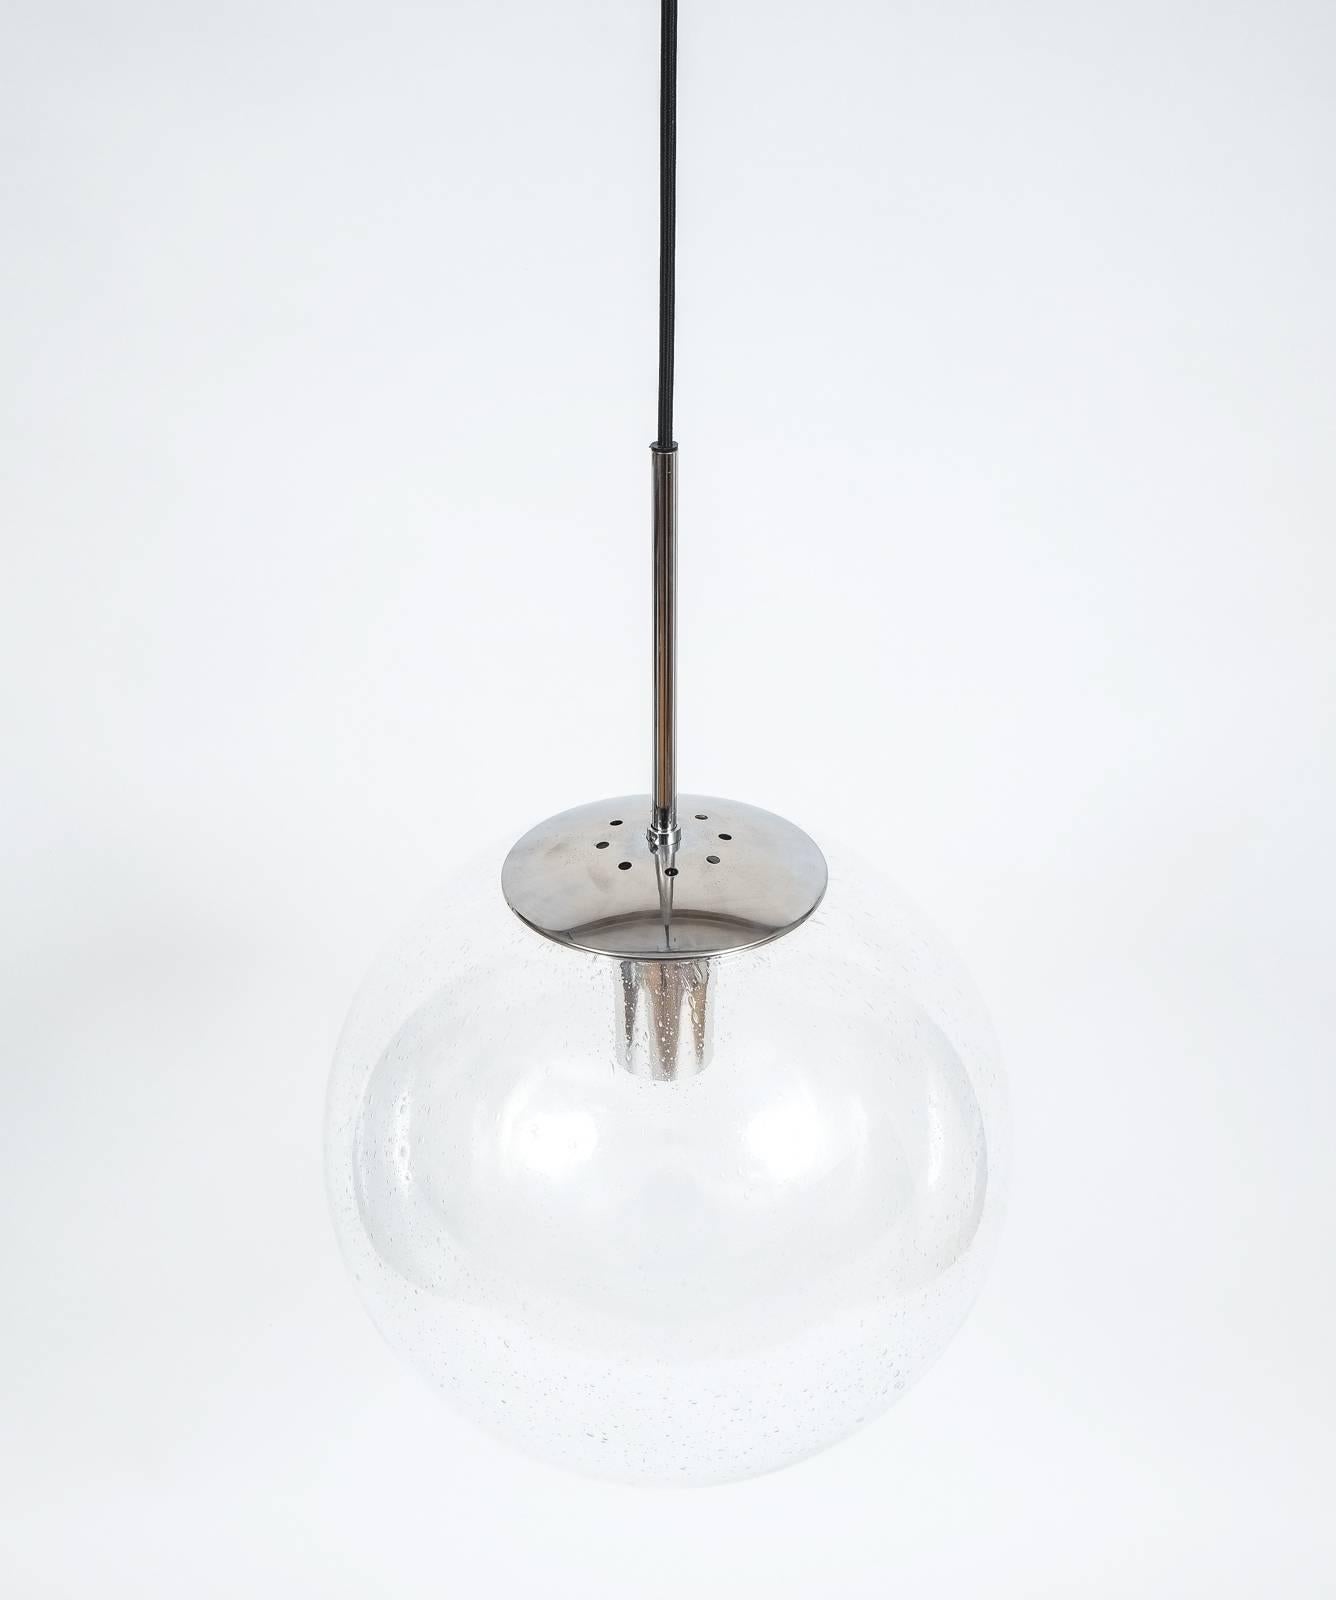 Glashütte Limburg Large Clear Glass Ball Pendant Light Lamps, circa 1960- priced individually

Beautiful set of four (4)  16 inch globe pendants by Glashütte Limburg/Germany featuring a clear glass globe and polished chrome hardware, which can be